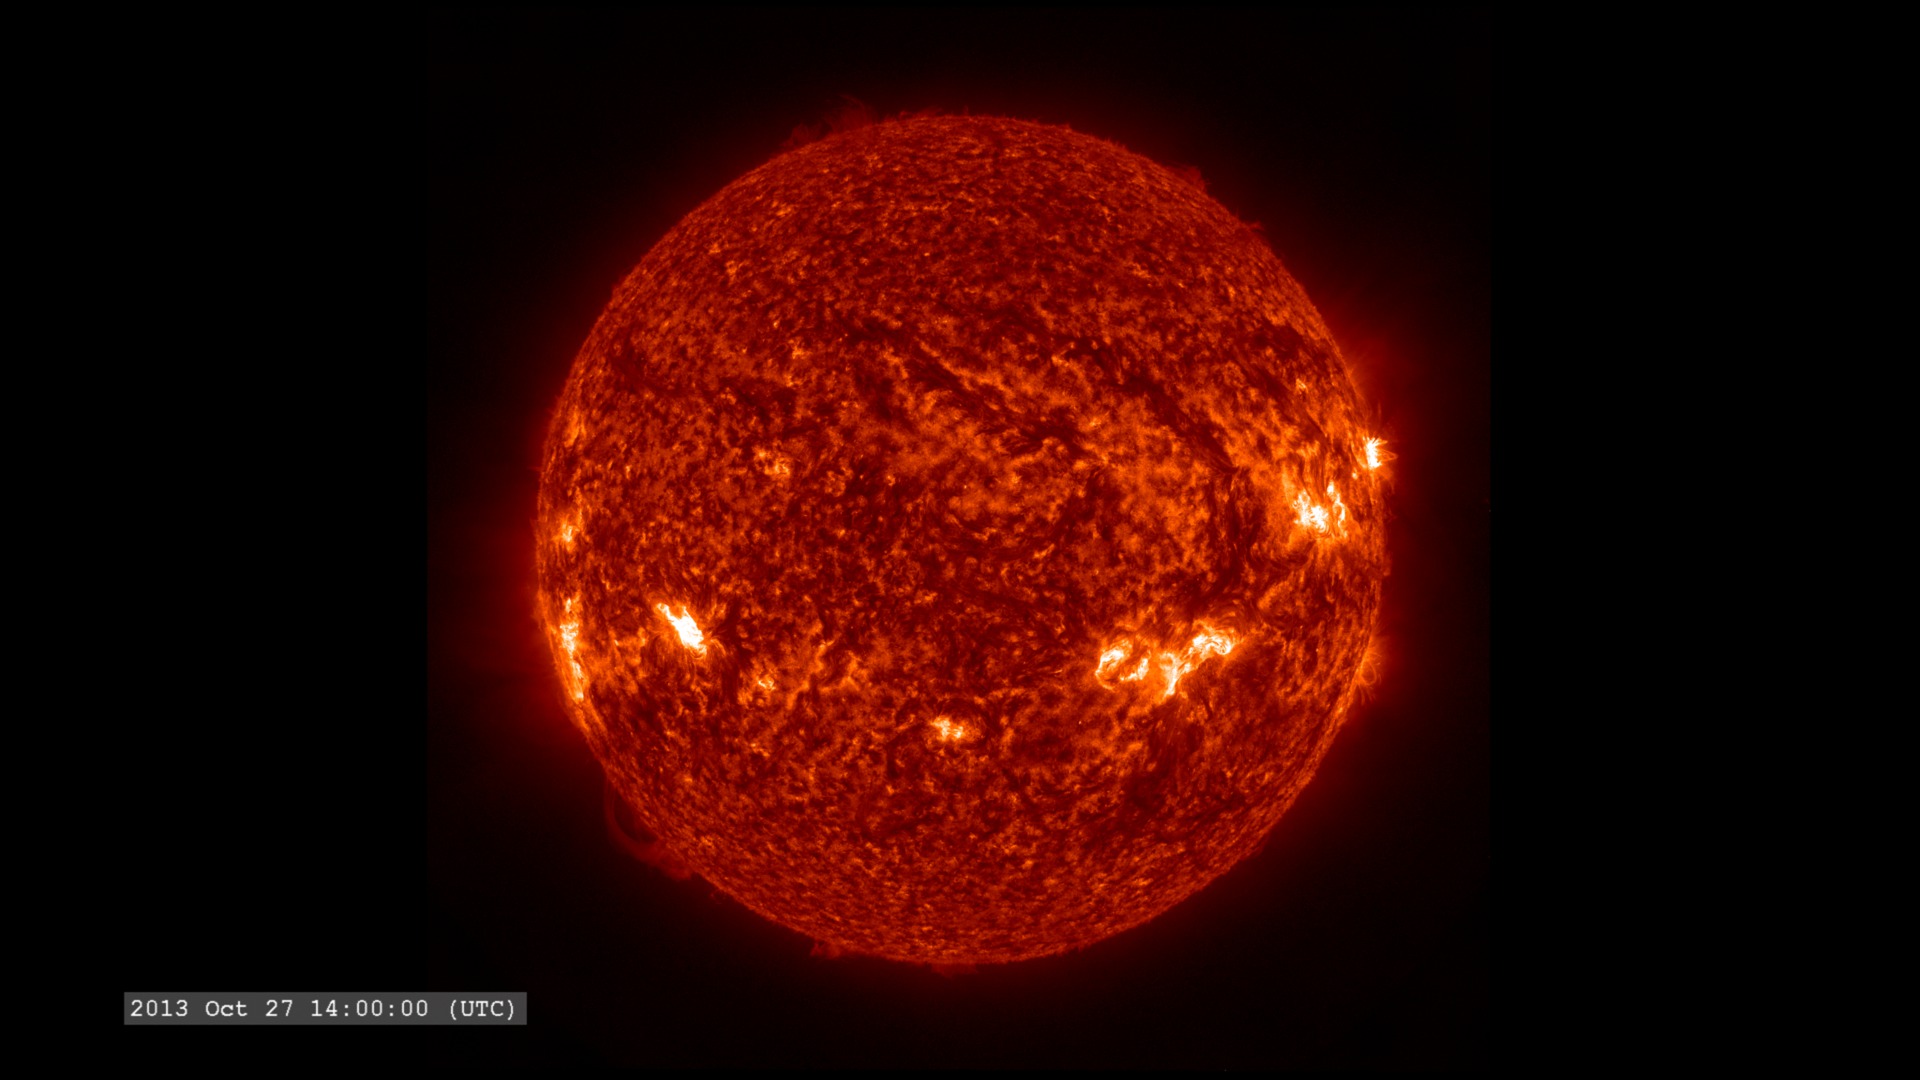 Movie of continuing solar activity in October 2013.